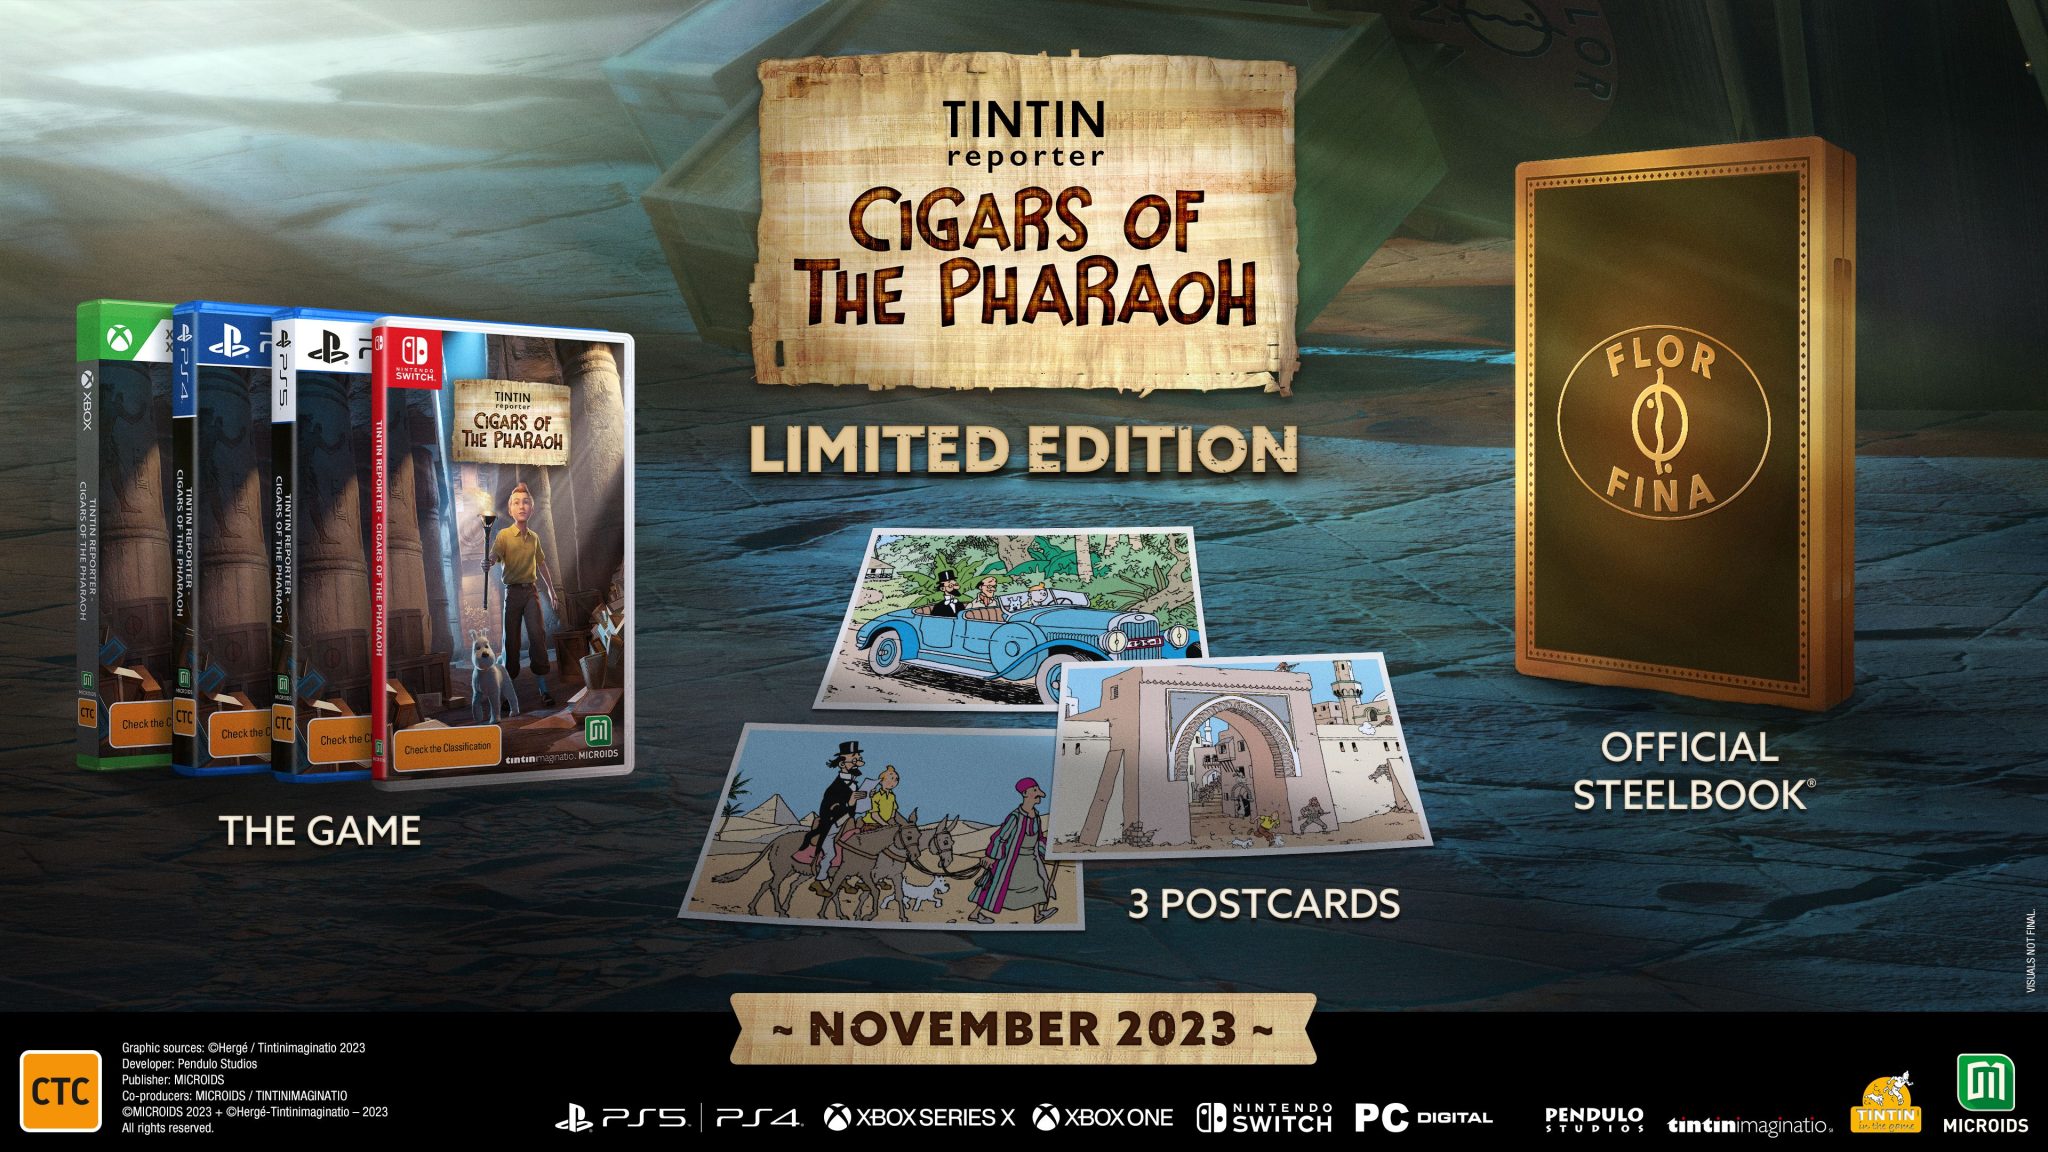 Tintin Reporter - Cigars of the Pharaoh limited edition